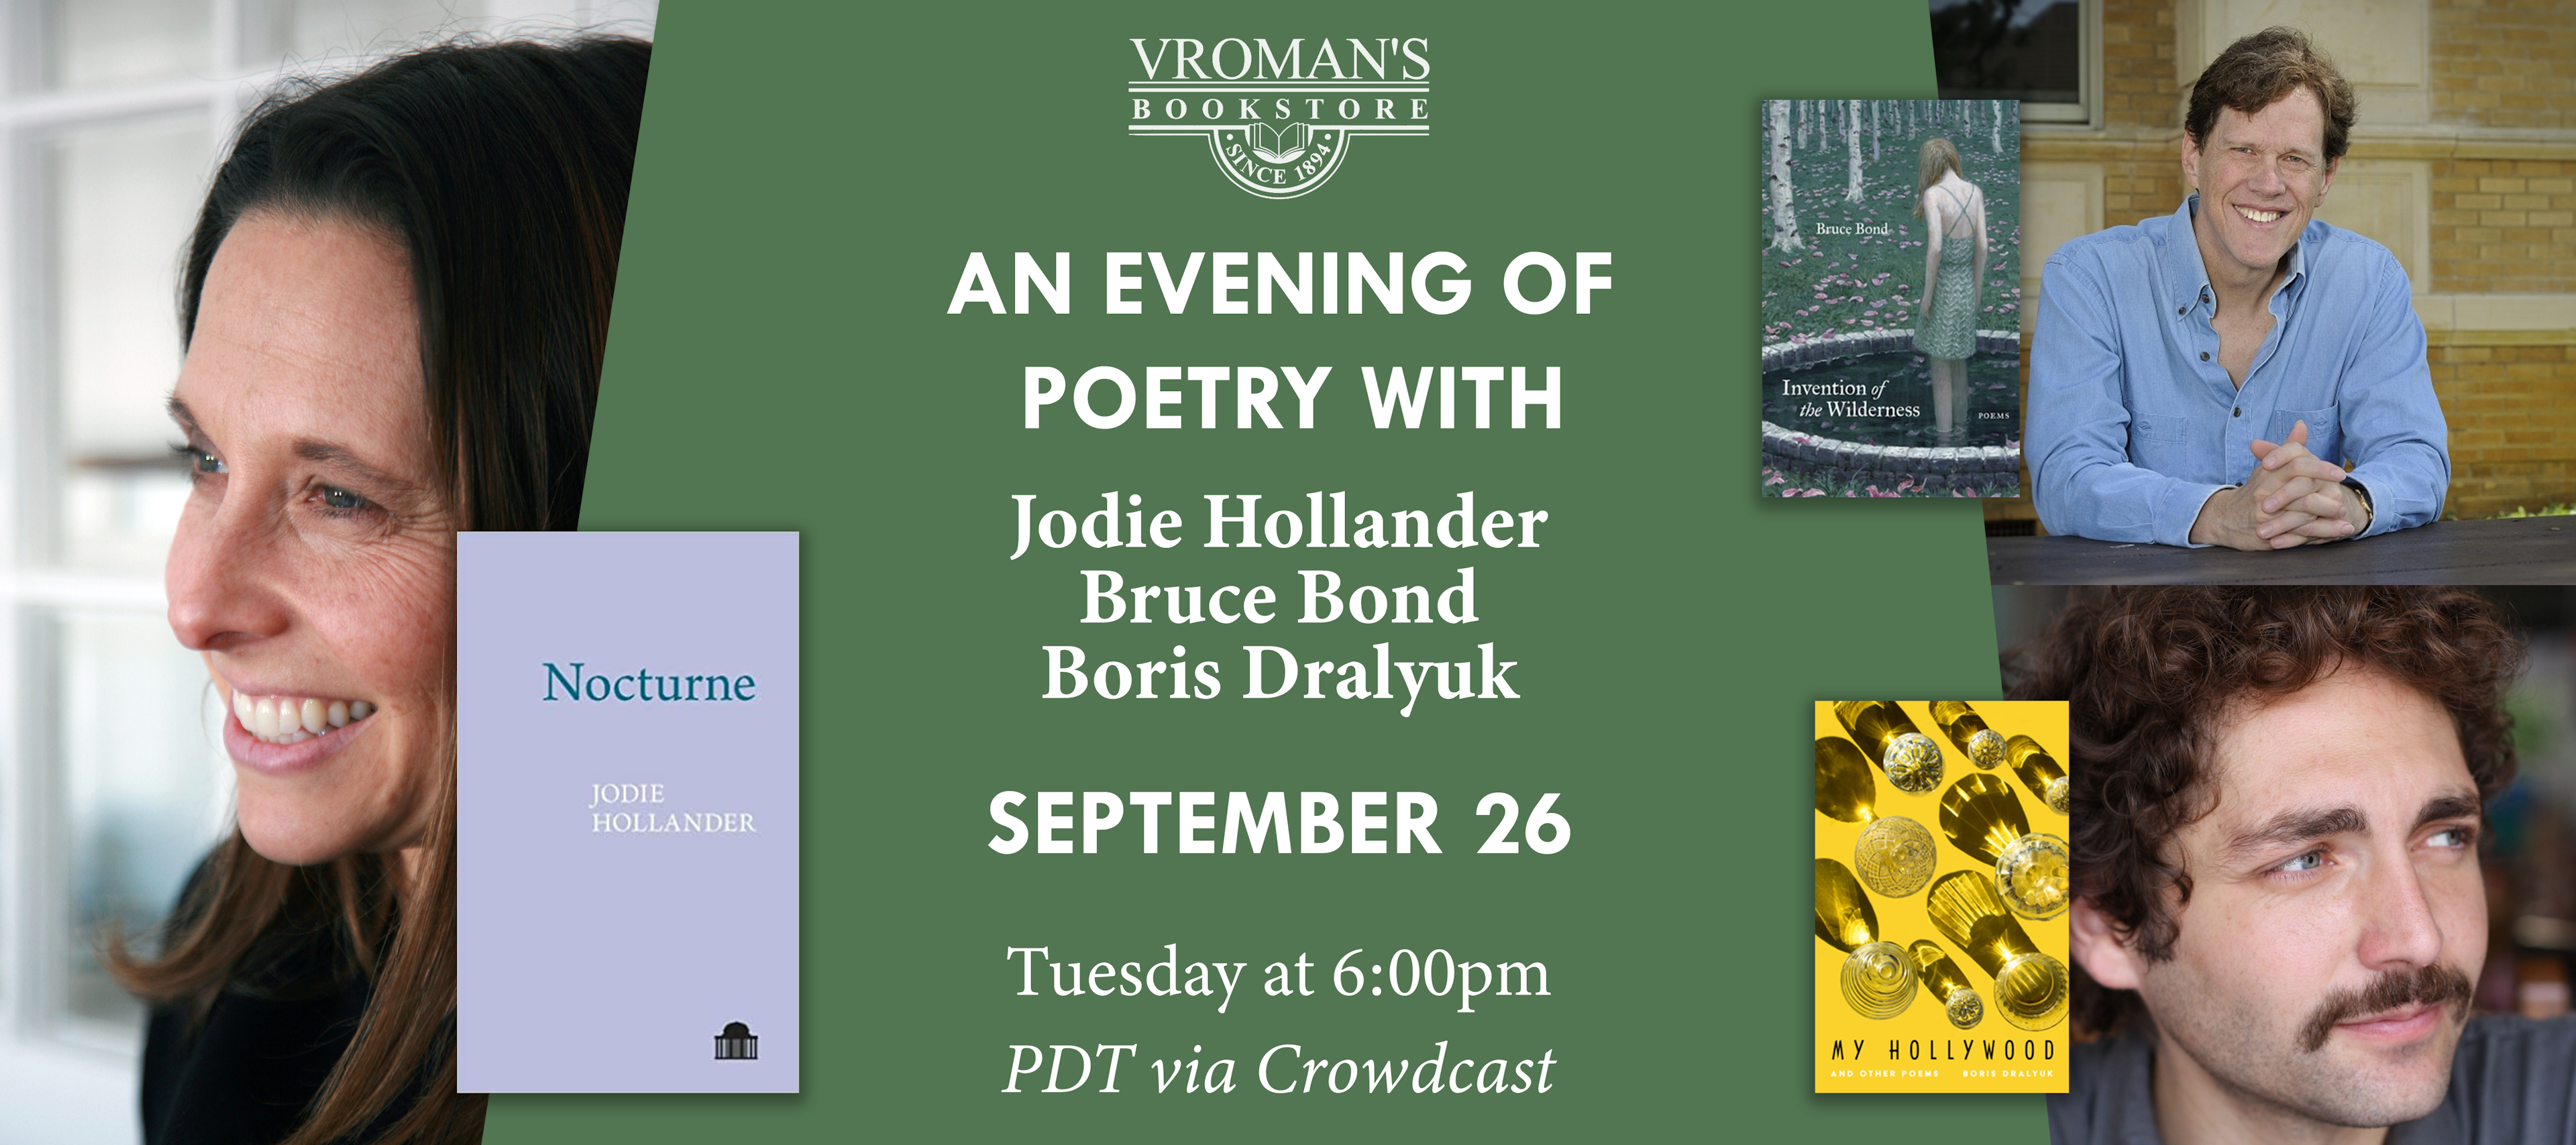 Vroman’s Live presents An Evening of Poetry with Jodie Hollander, Bruce Bond, and Boris Dralyuk event cover photo